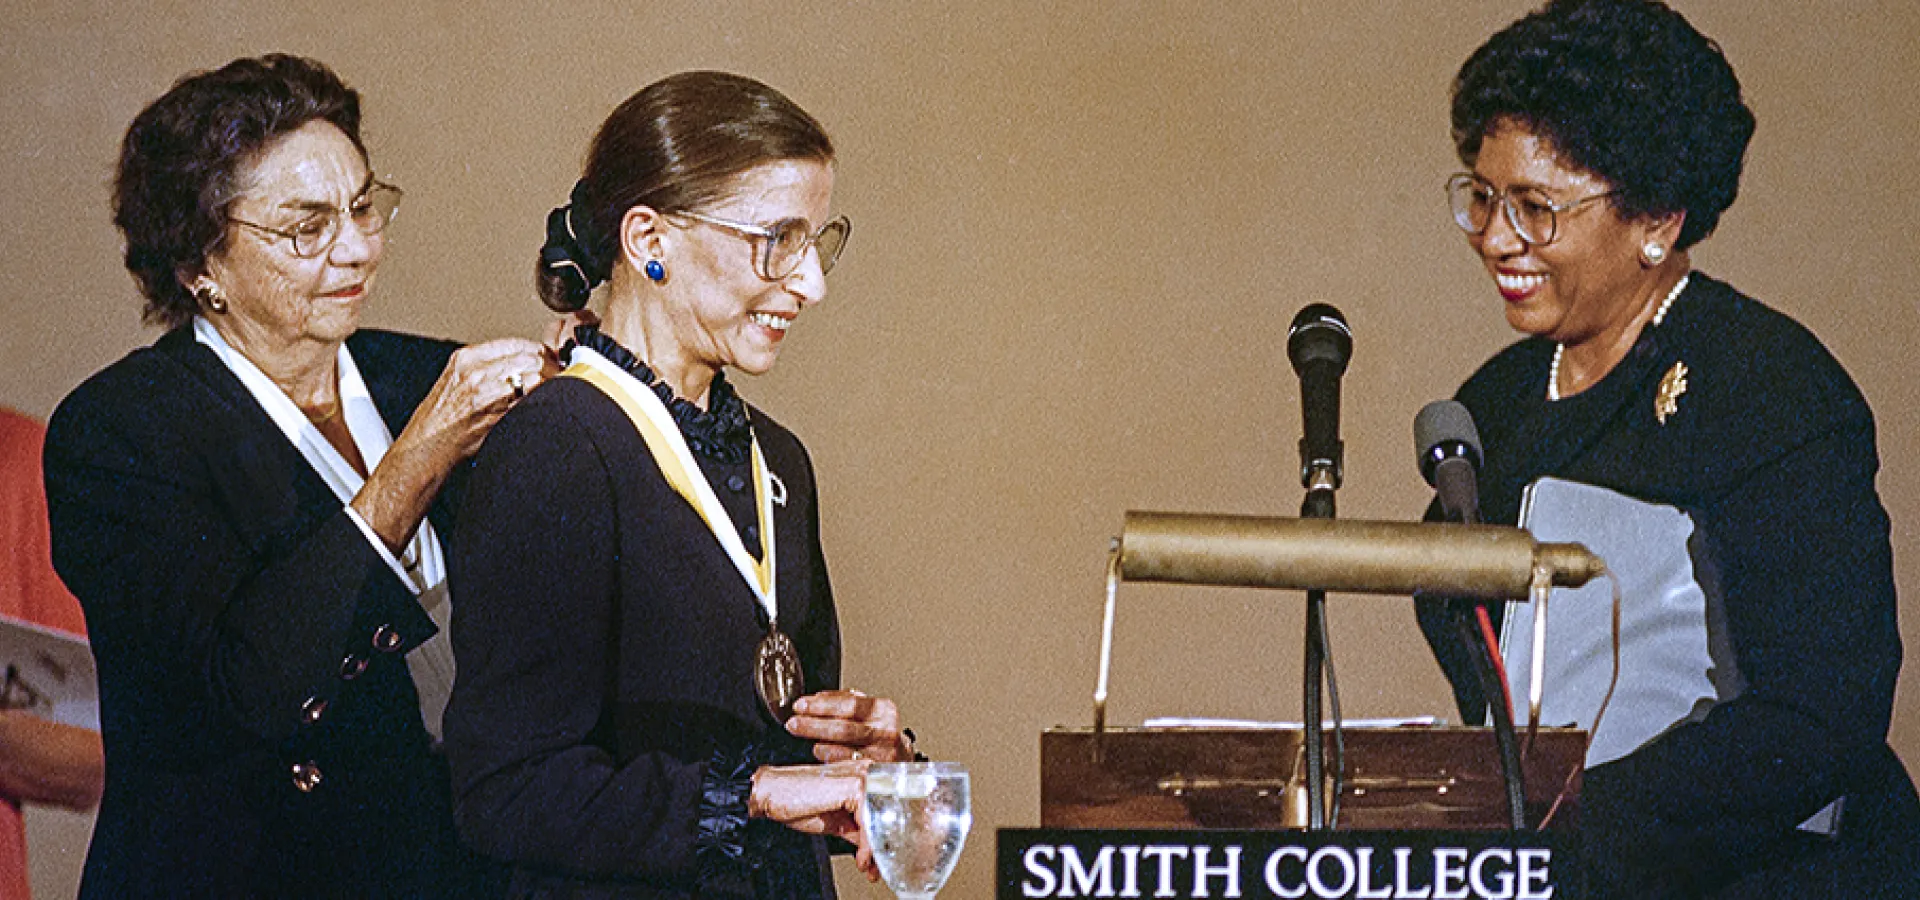 Image of Ruth Bader Ginsburg receiving the Smith Medal